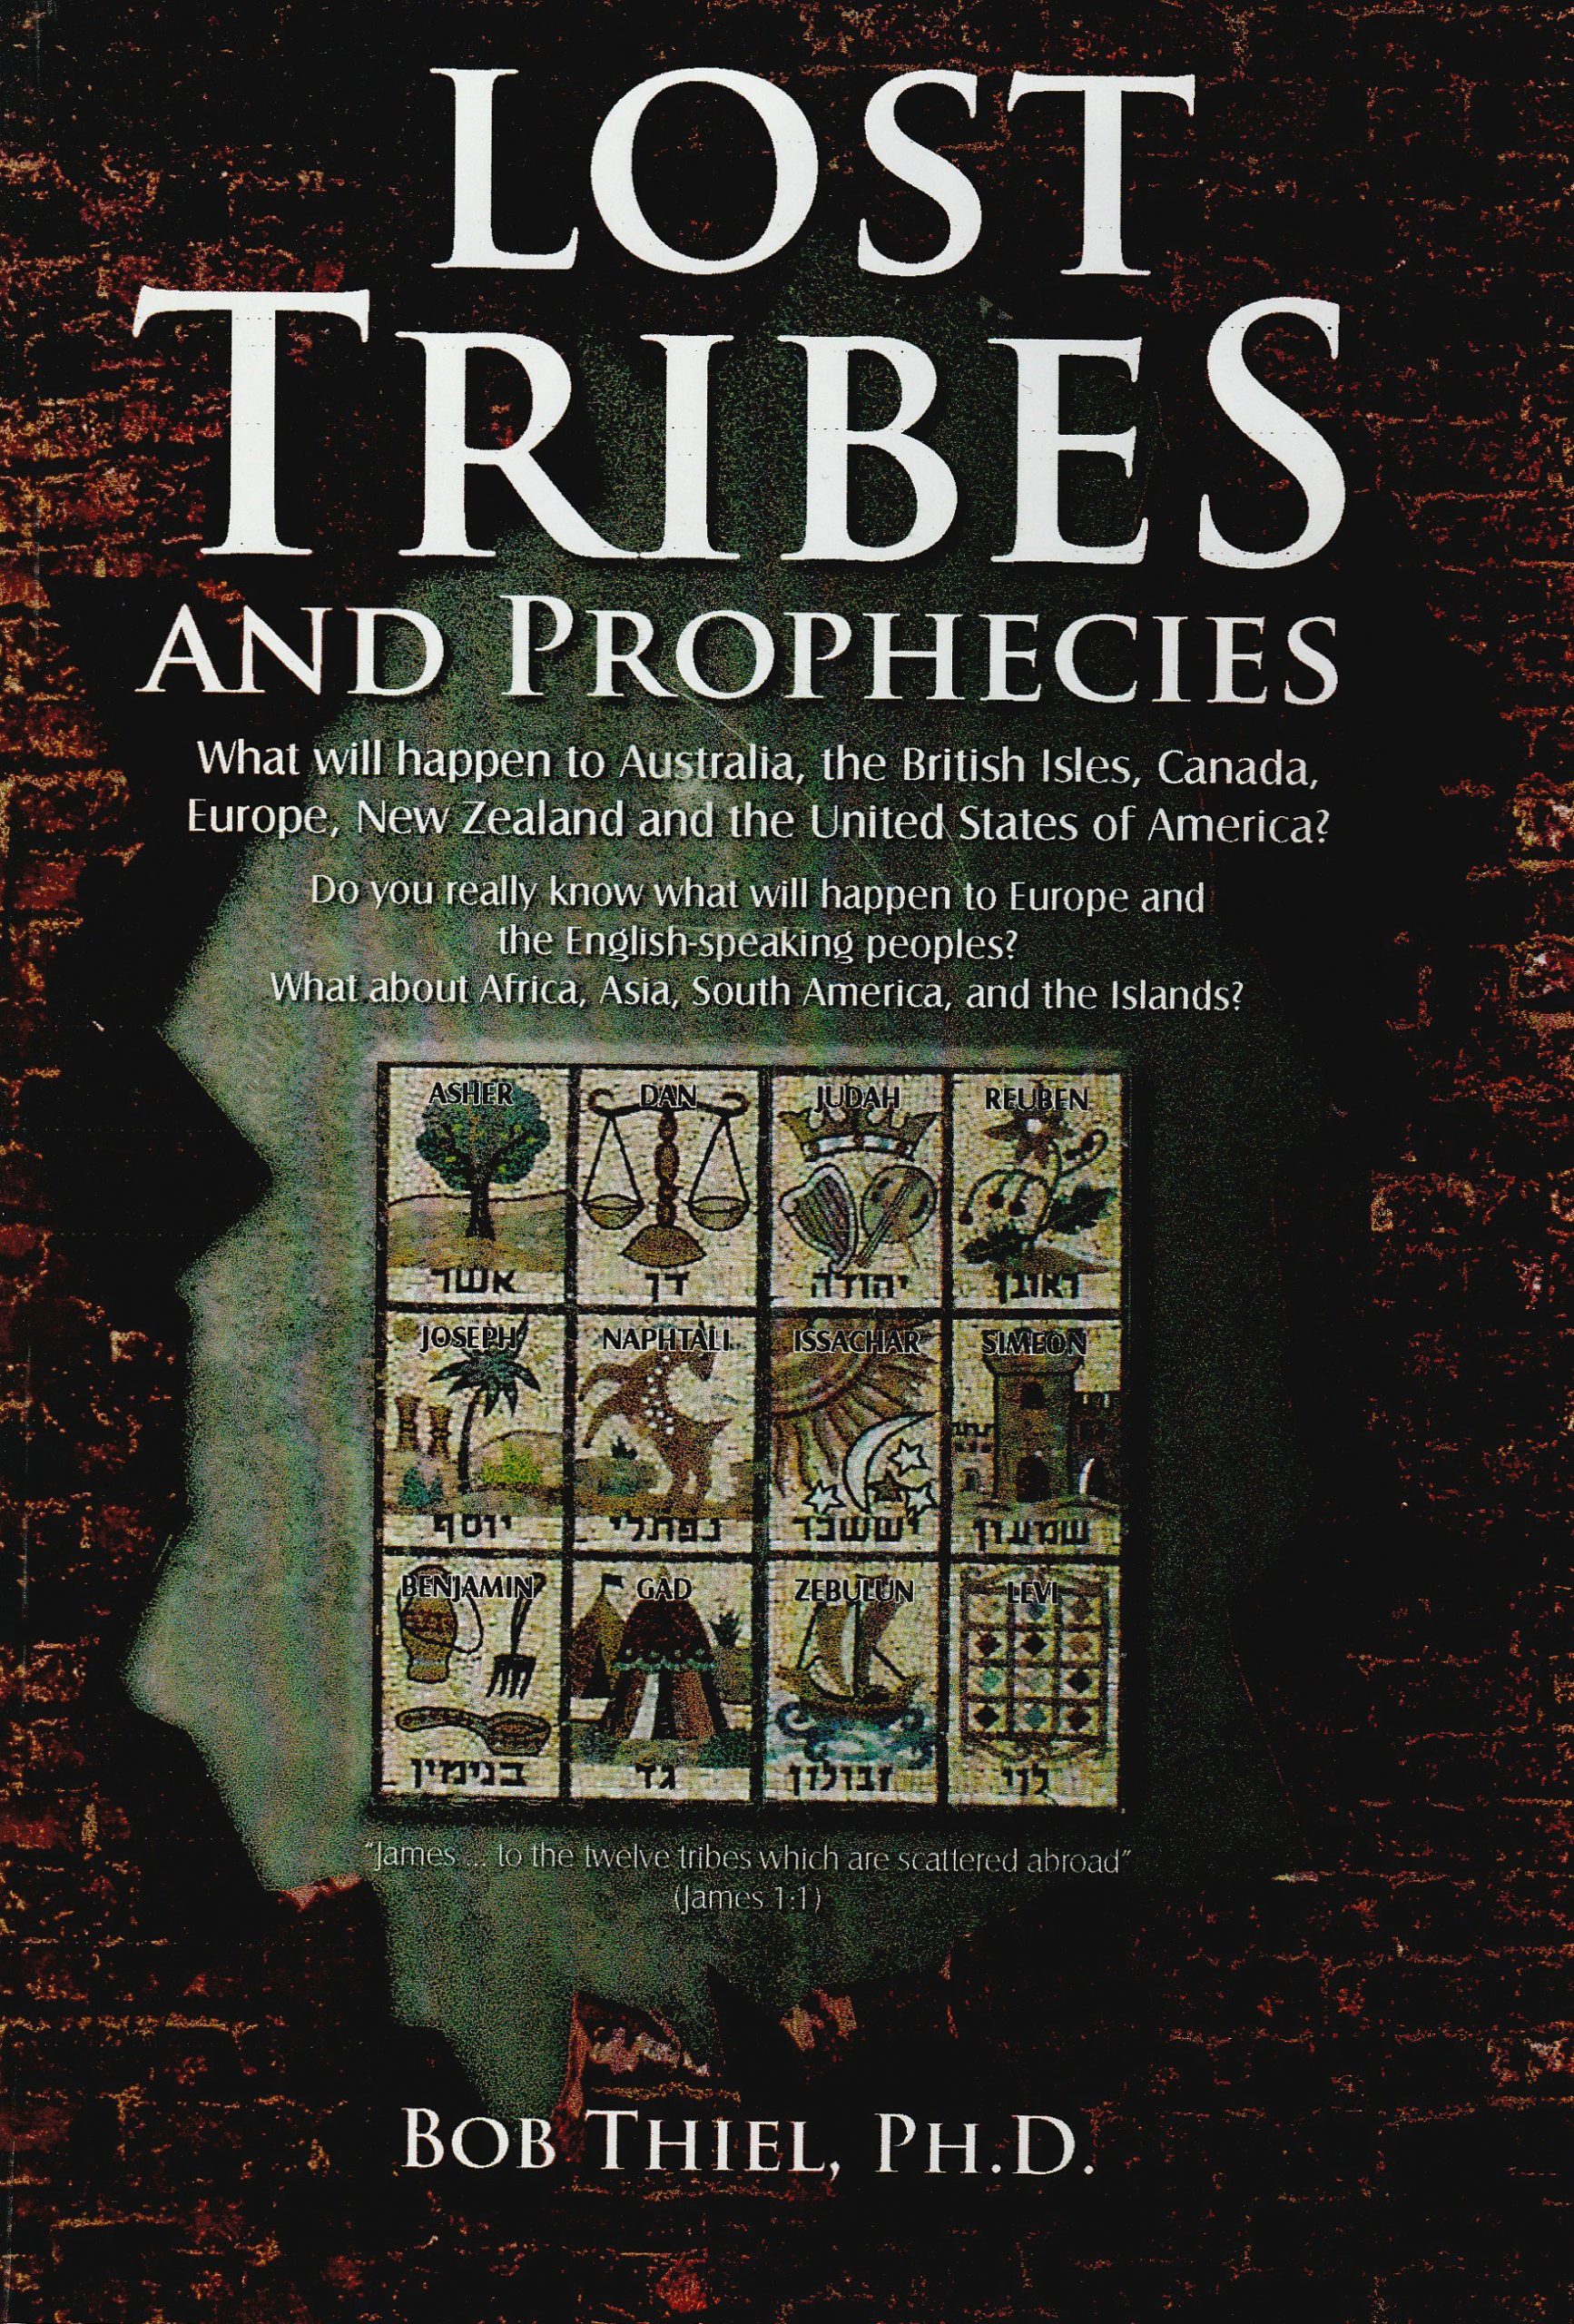 Lost tribes, prophecies, and identifications